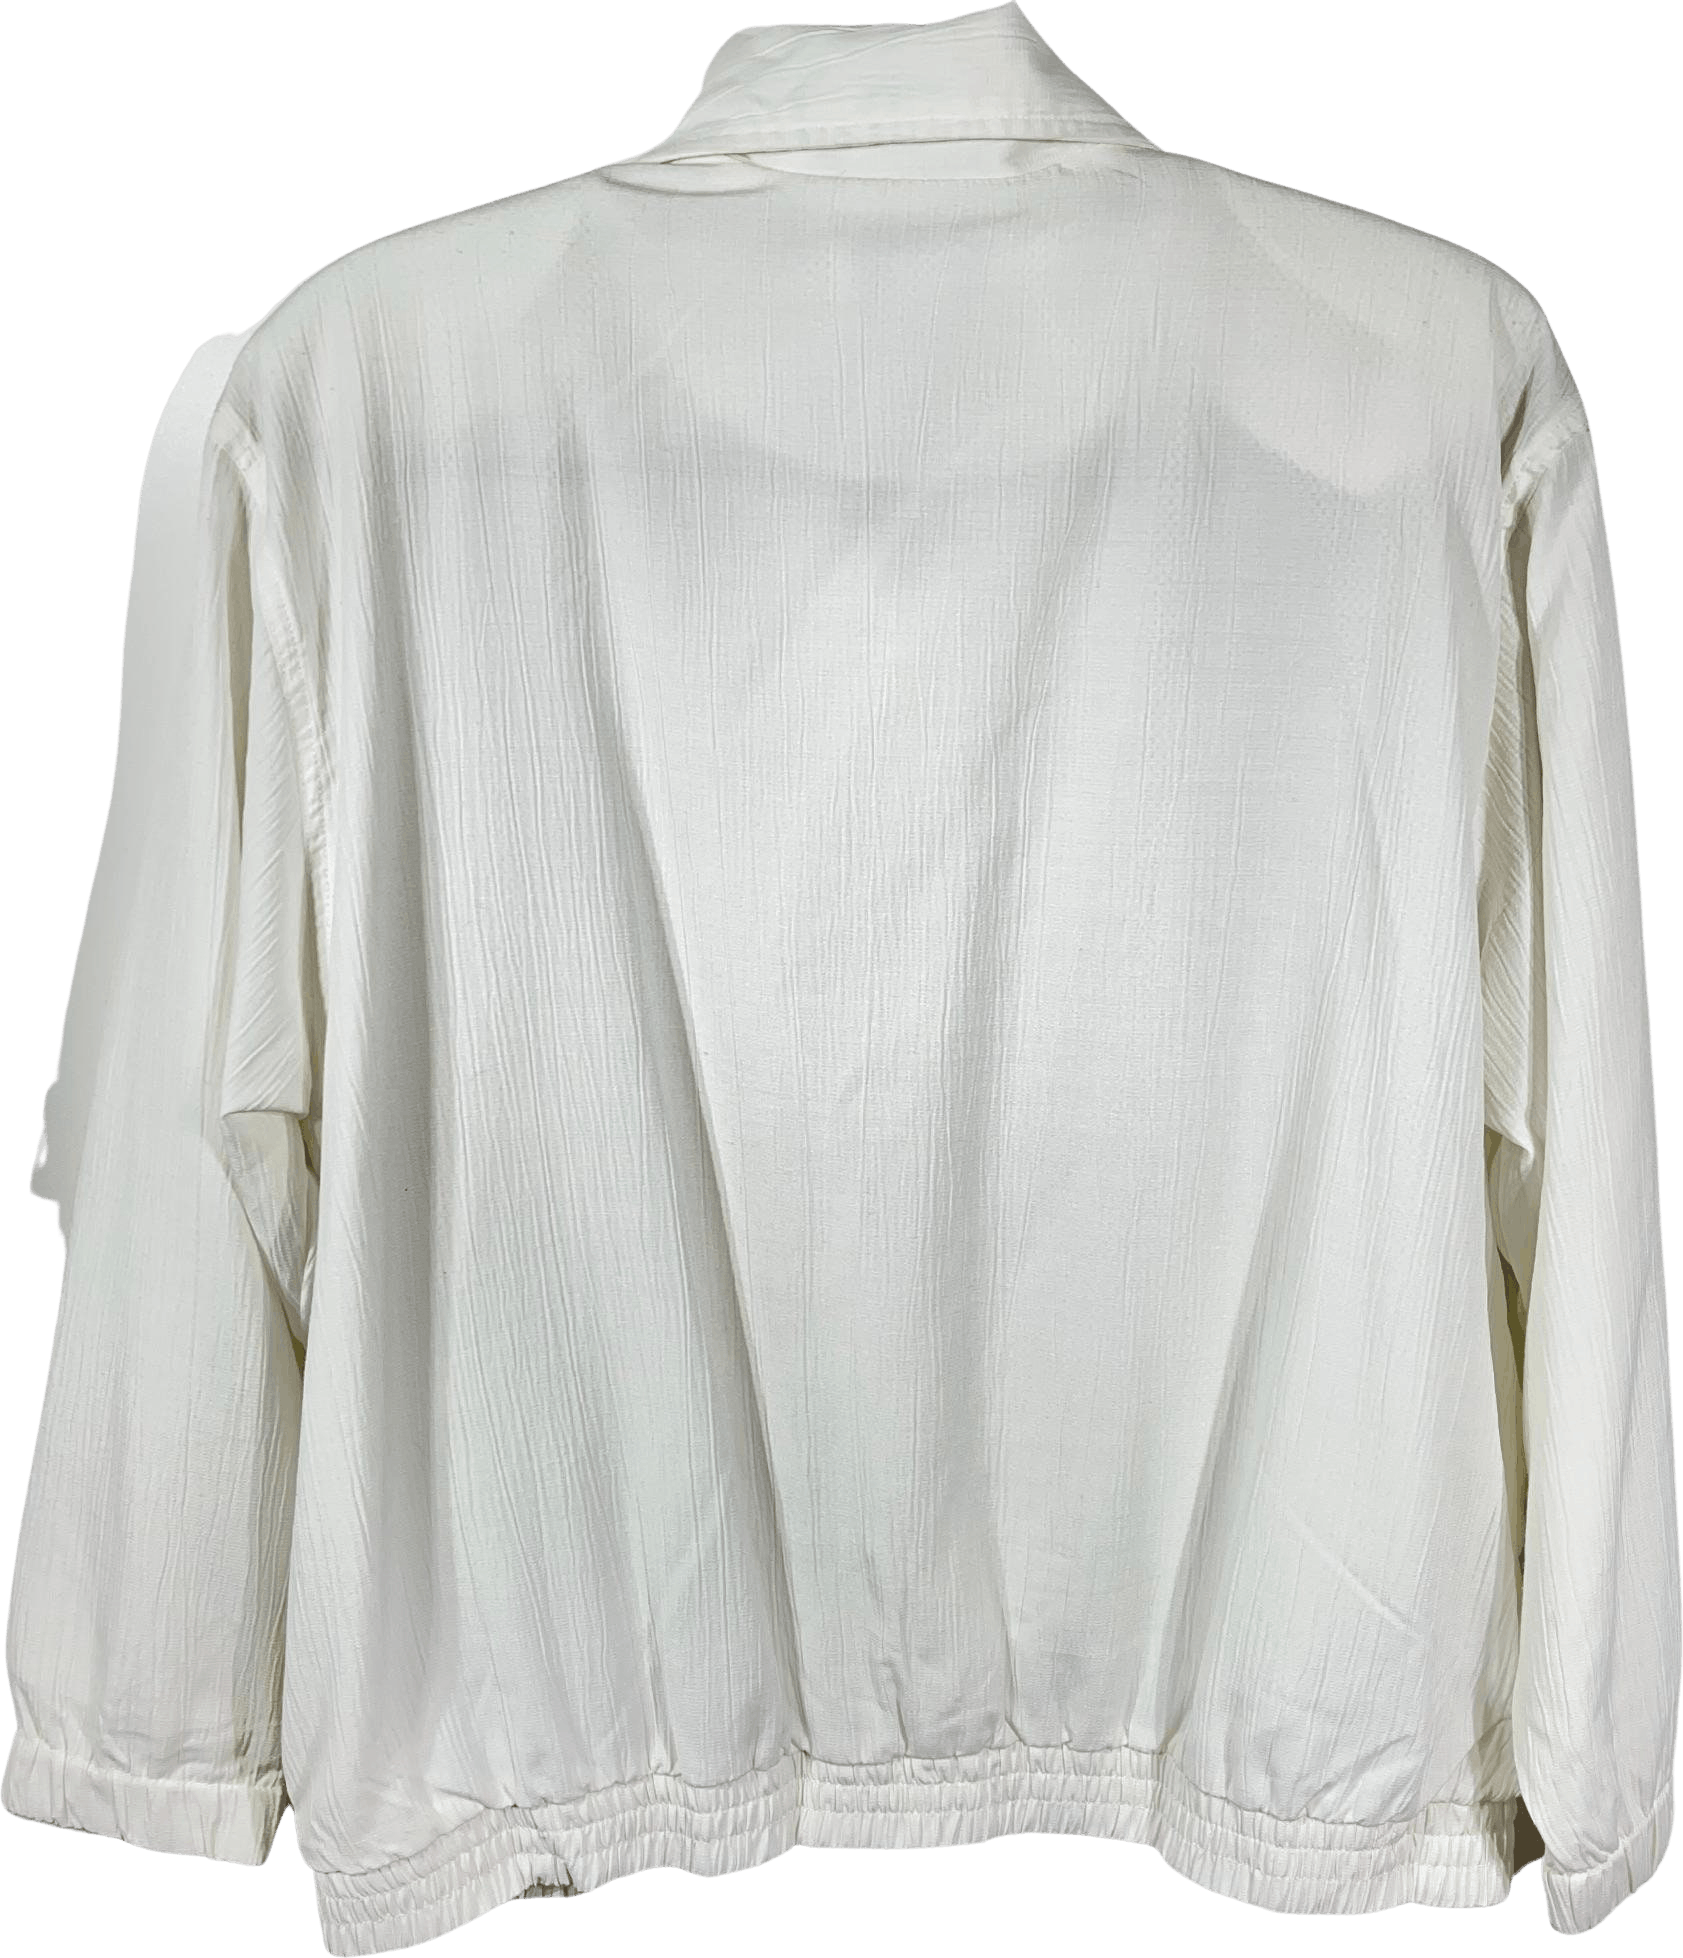 Vintage 90’s White Embroidered Floral Jacket by Alfred Dunner | Shop ...